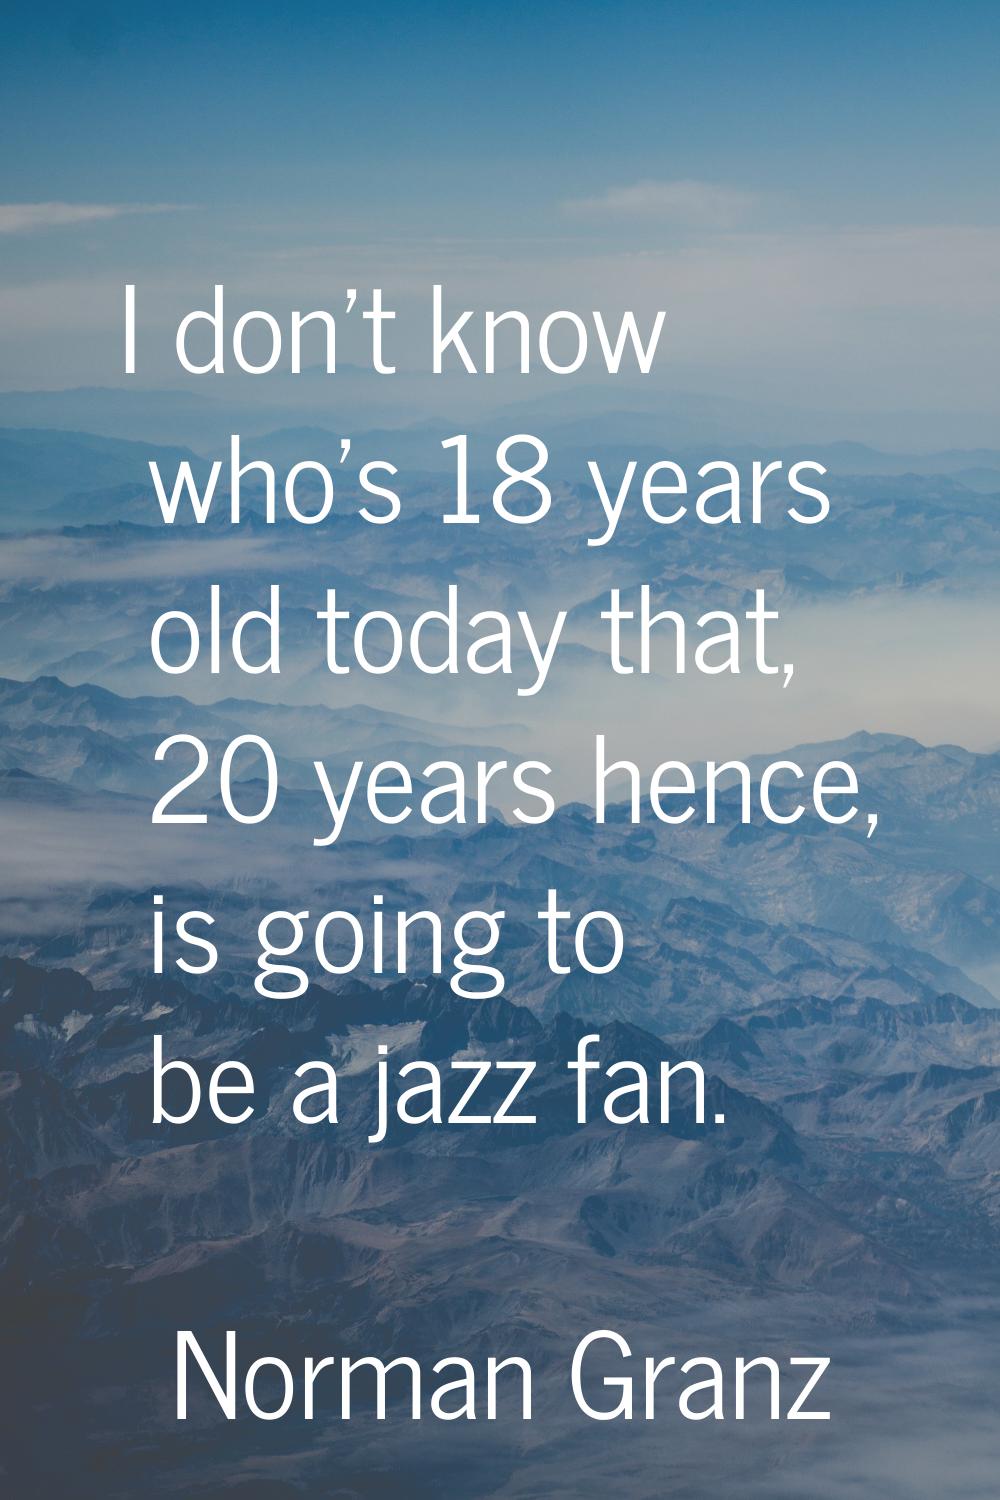 I don't know who's 18 years old today that, 20 years hence, is going to be a jazz fan.